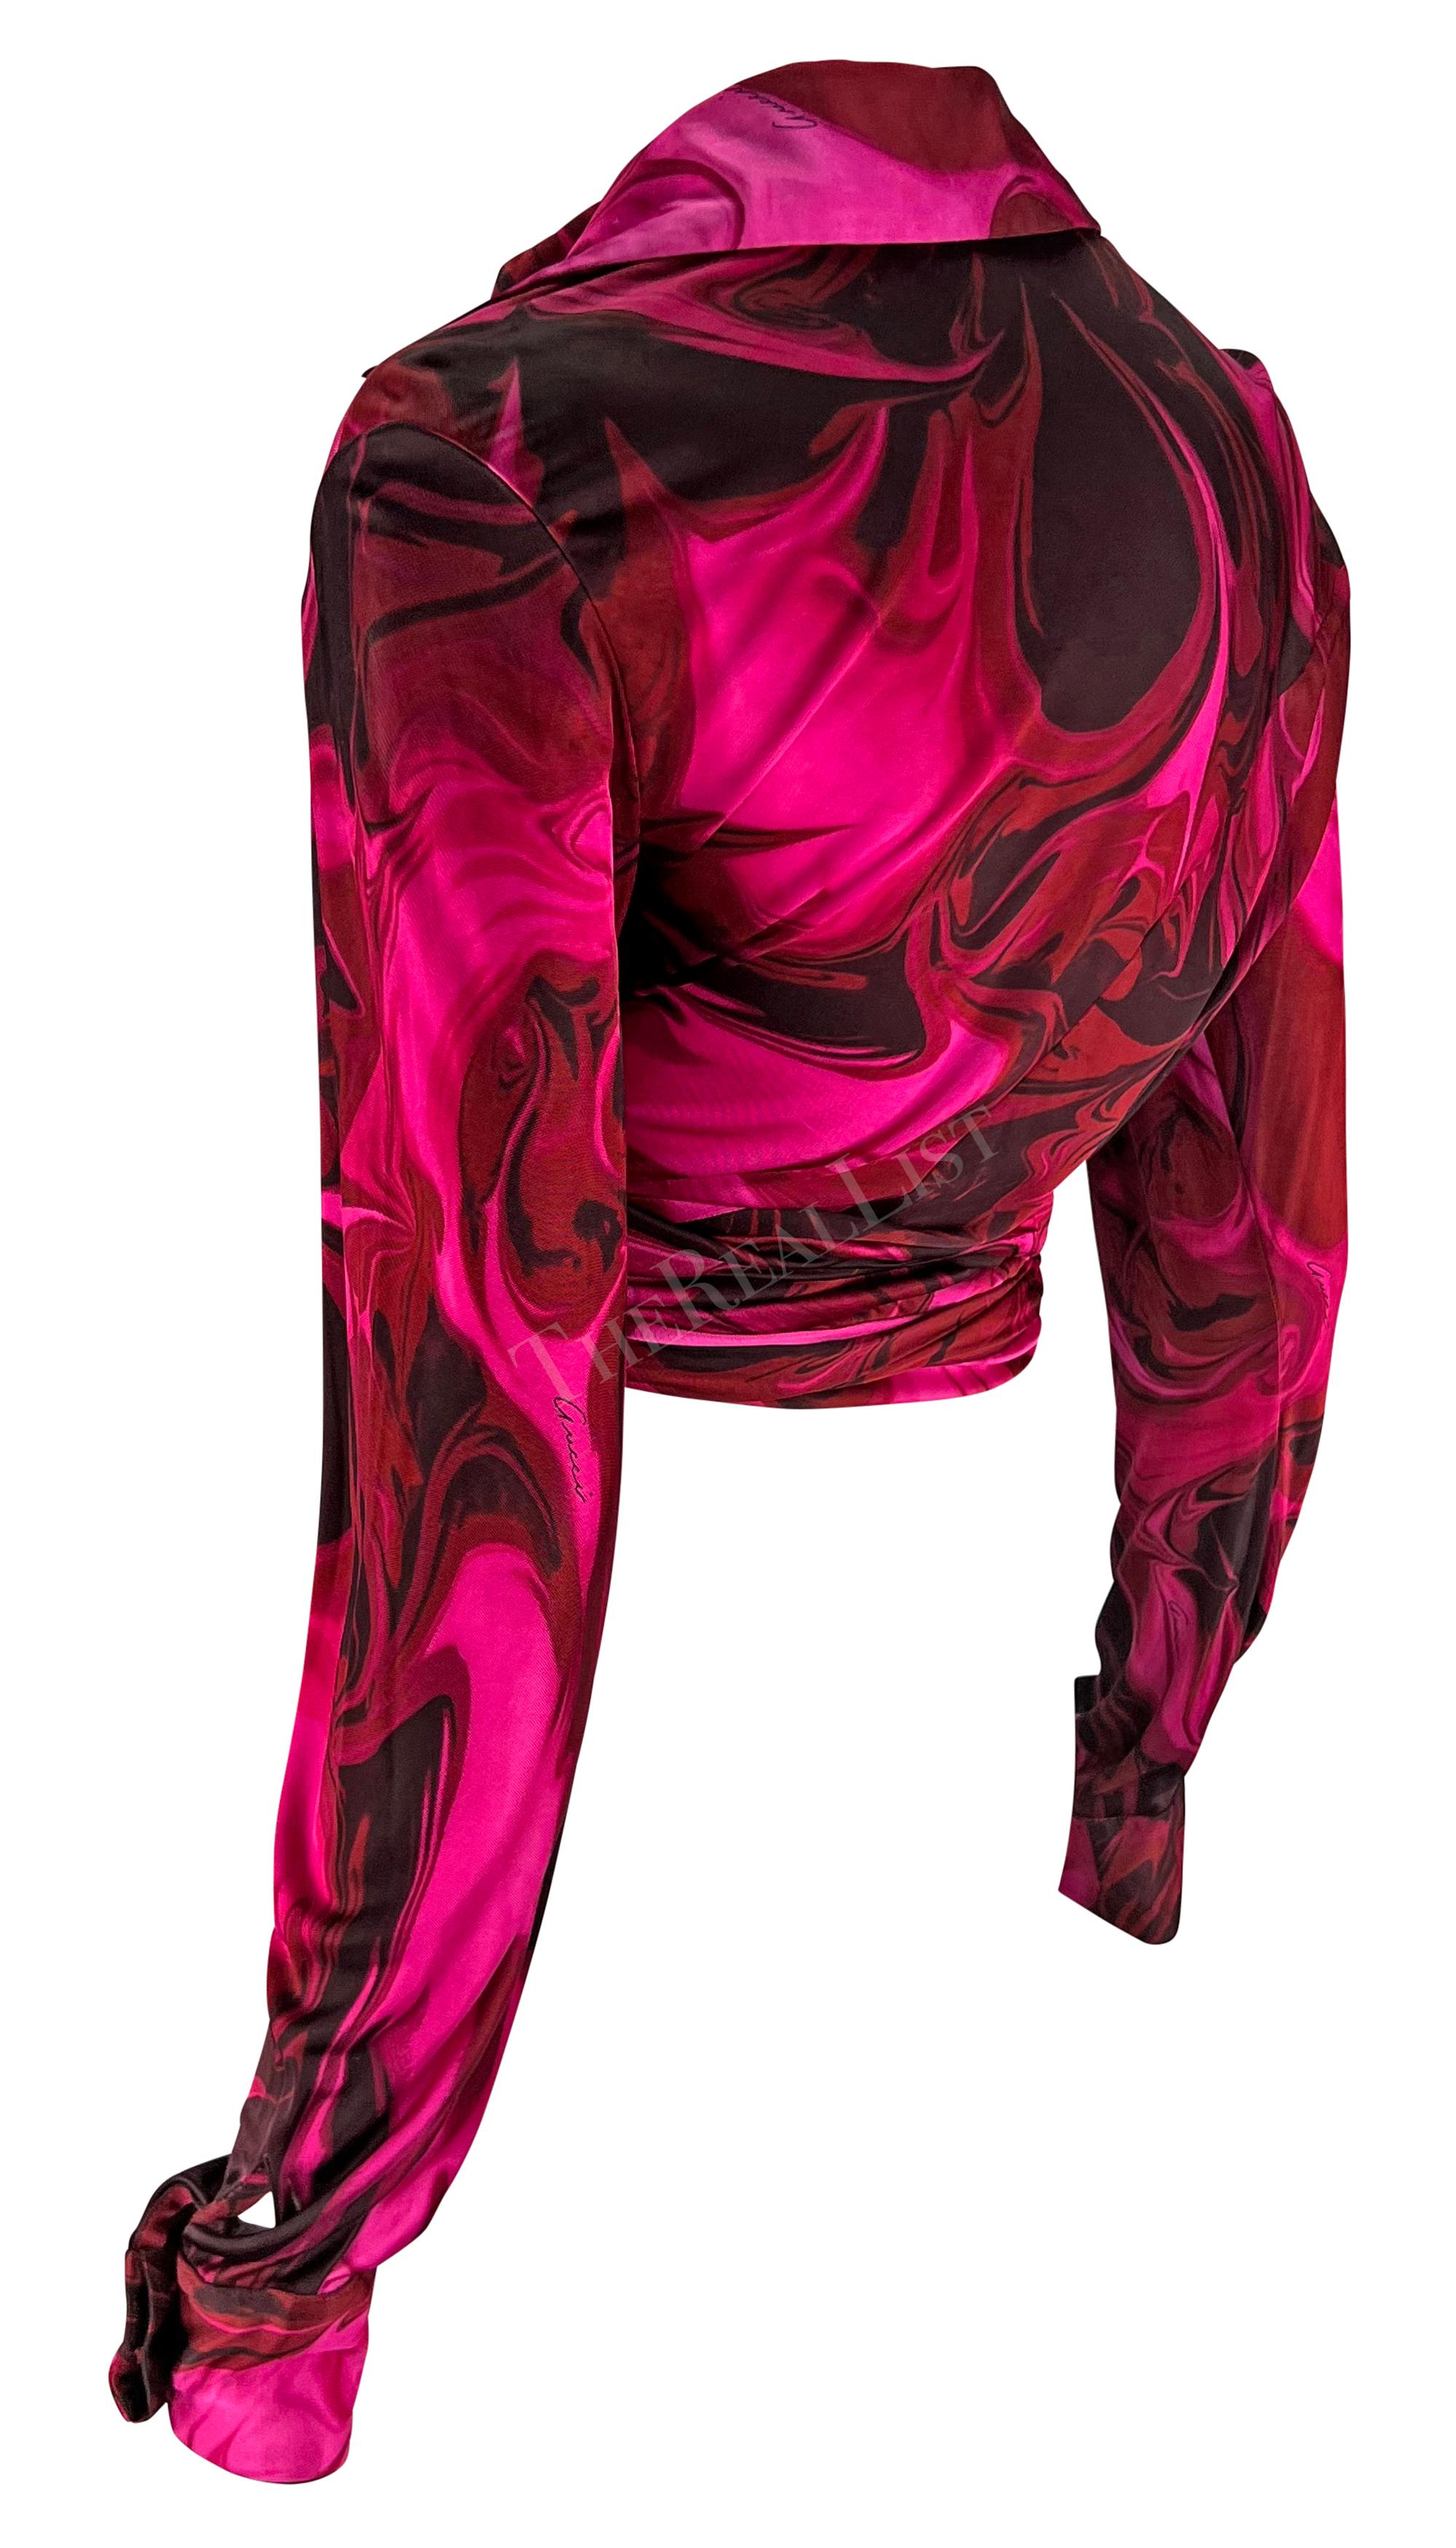 Women's S/S 2001 Gucci by Tom Ford Pink Liquid Magma Print Wrap Blouse Crop Top For Sale